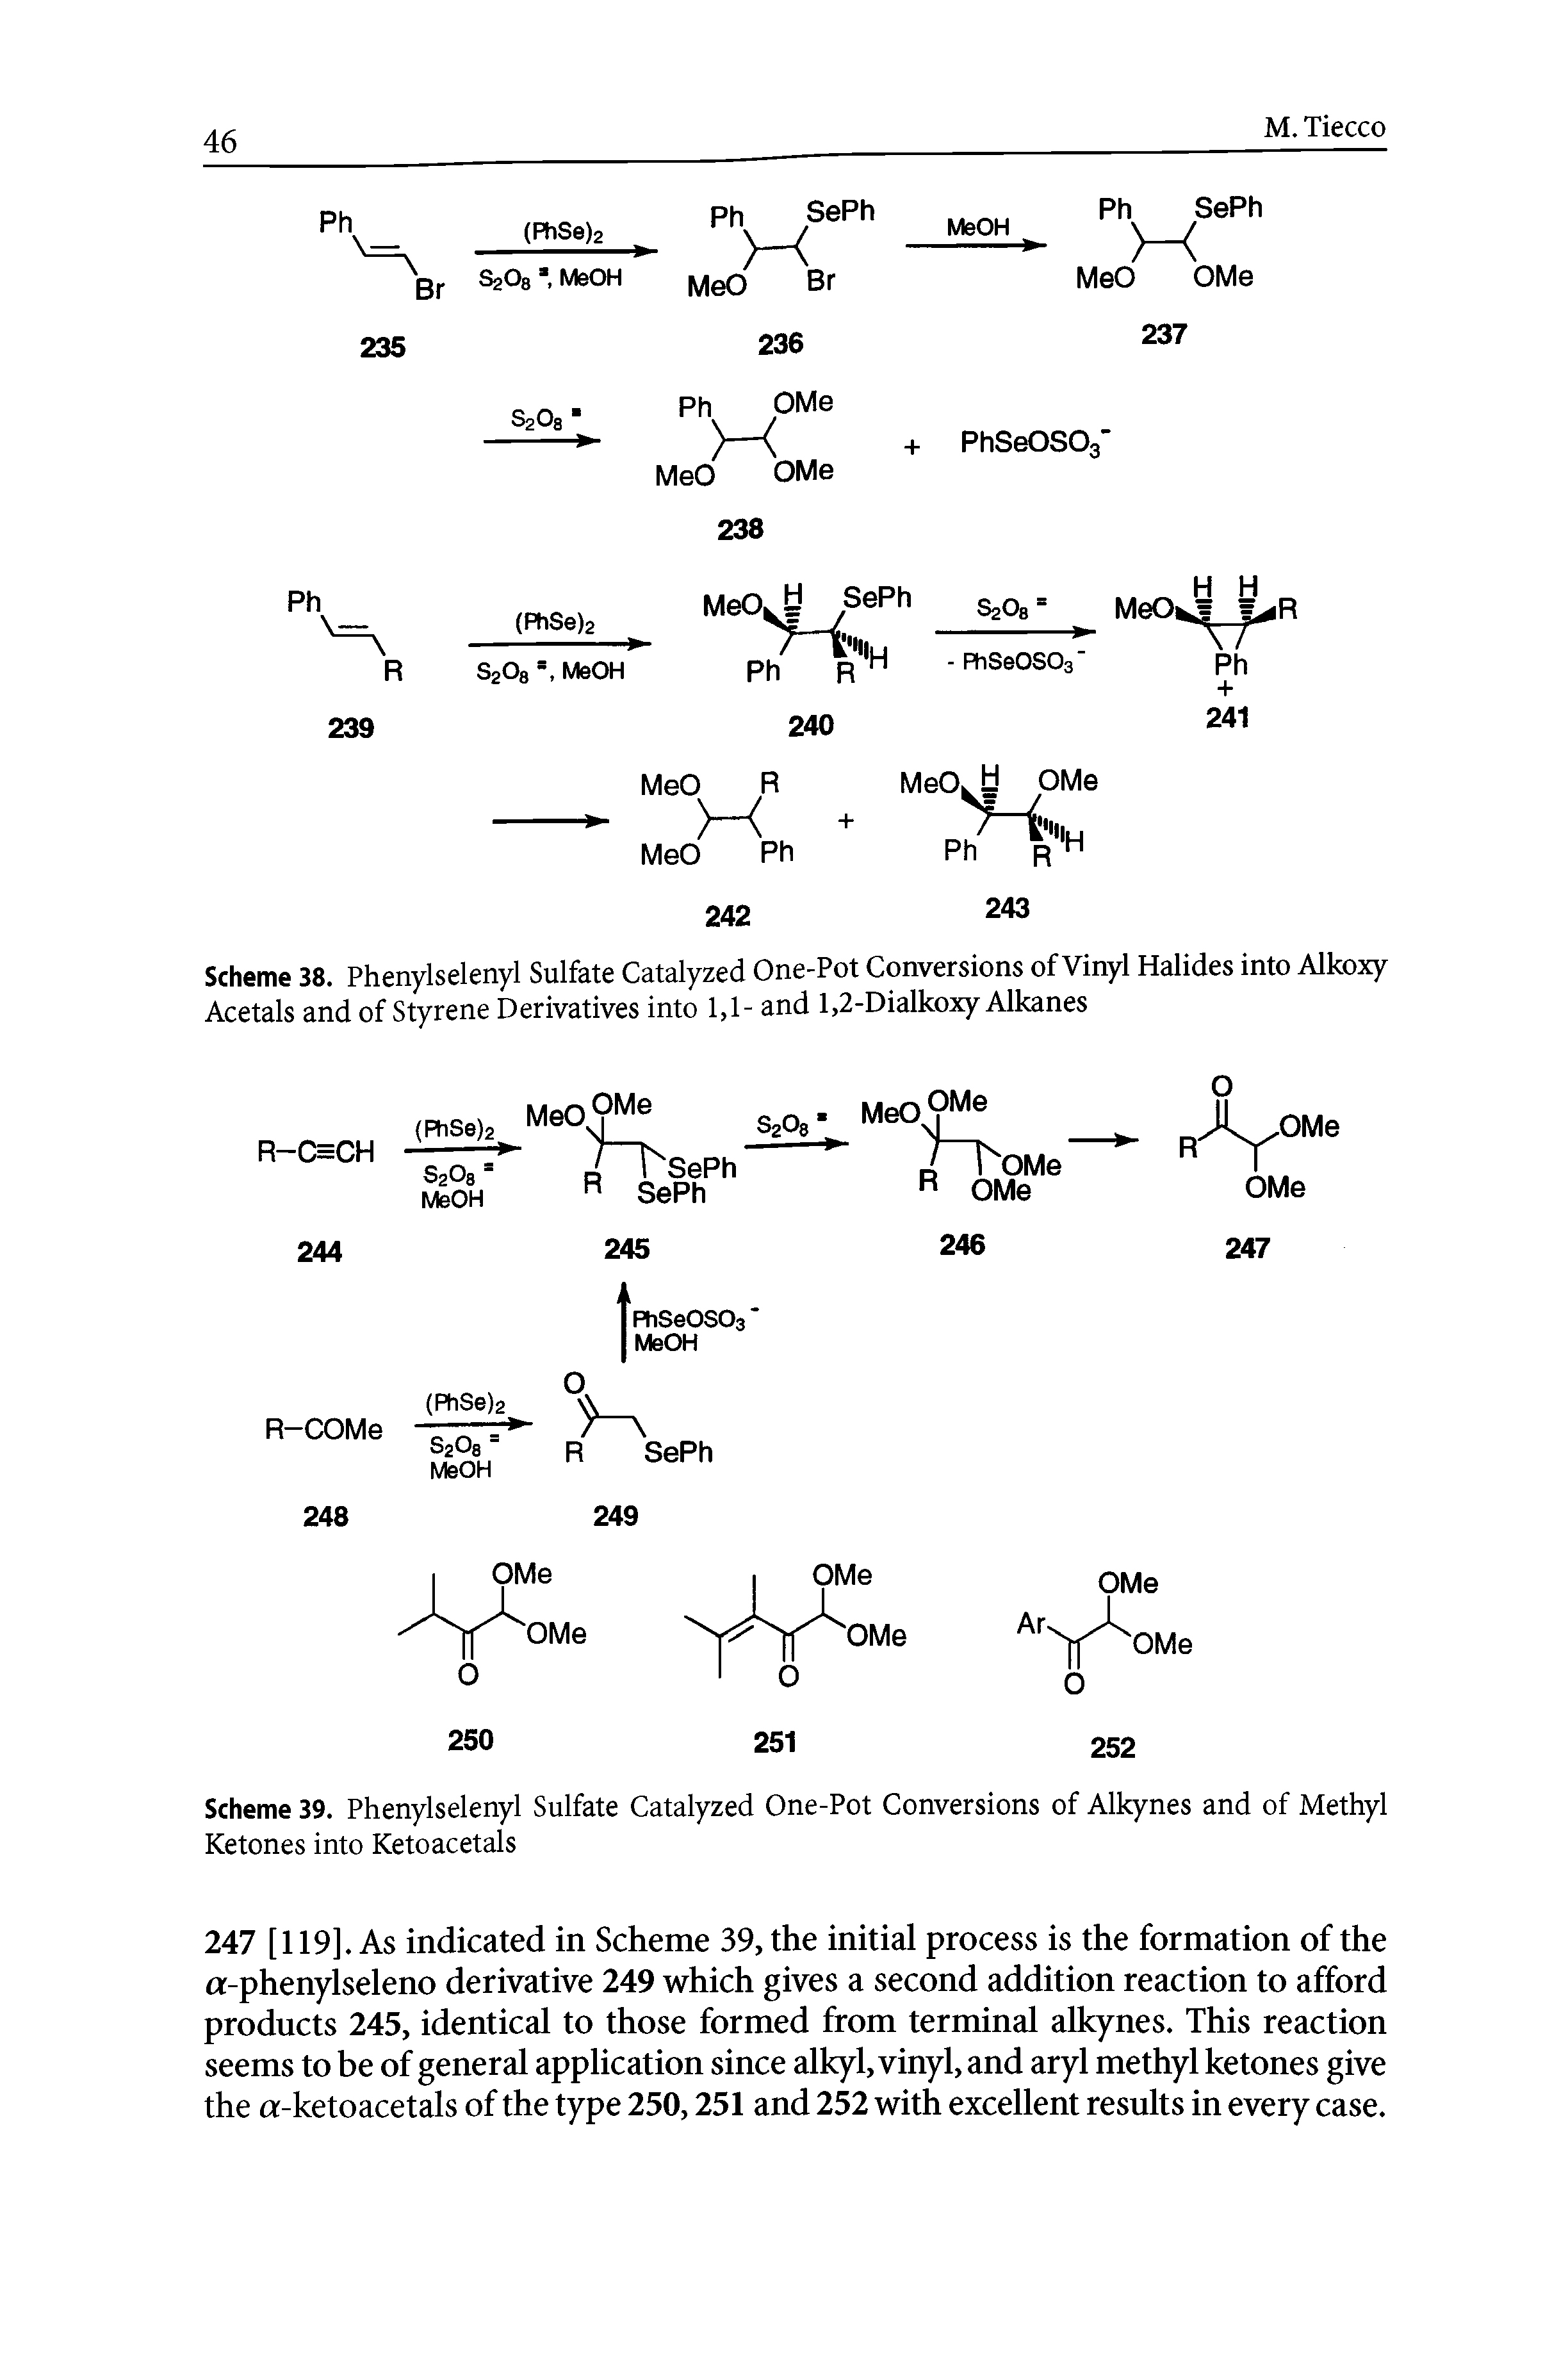 Scheme 38. Phenylselenyl Sulfate Catalyzed One-Pot Conversions of Vinyl Halides into Alkoxy Acetals and of Styrene Derivatives into 1,1- and 1,2-Dialkoxy Alkanes...